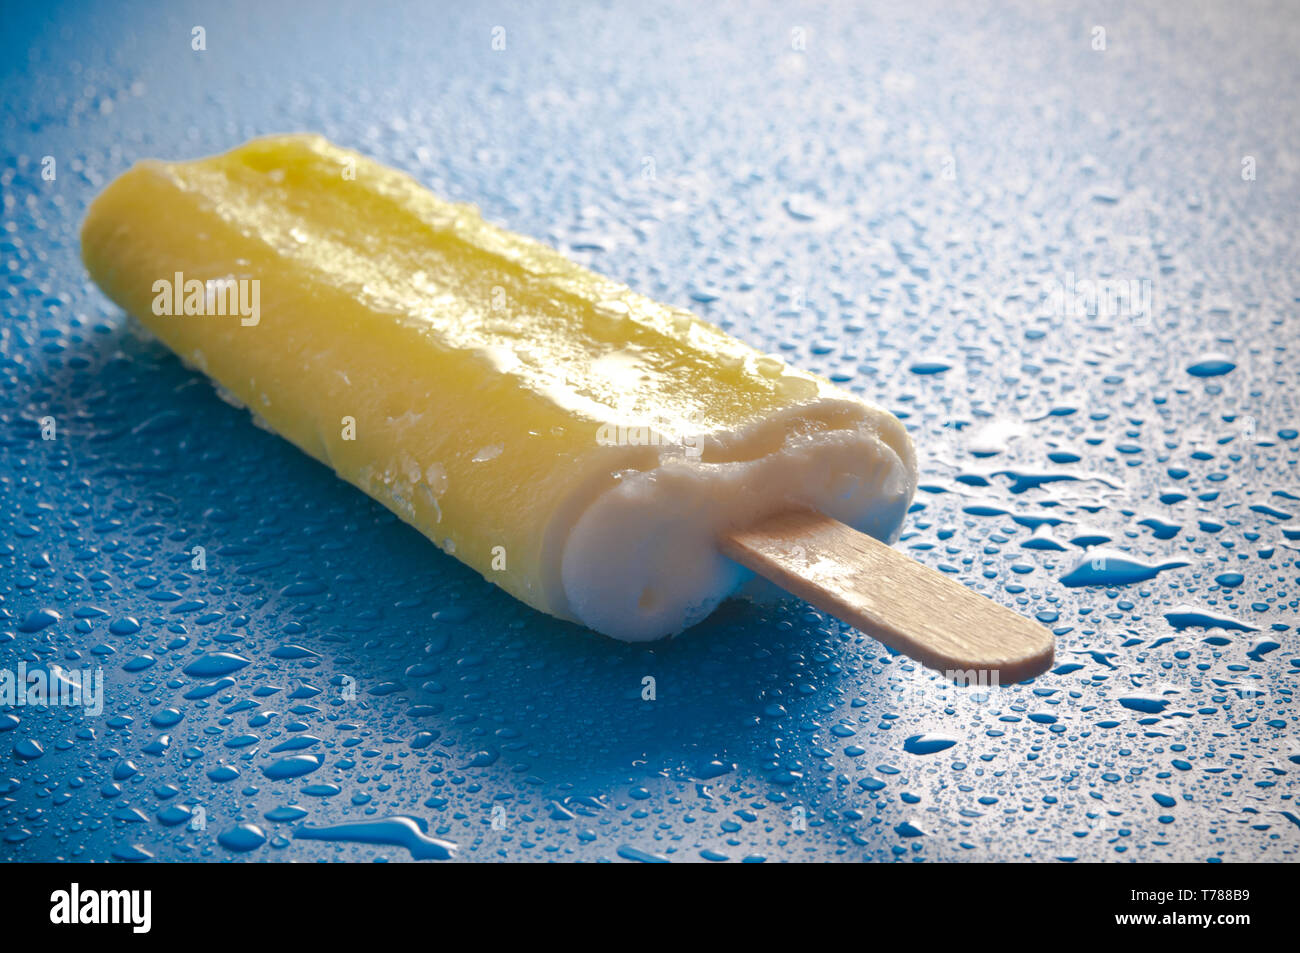 yellow ice lolly or ice pop on a blue background with drops of water Stock Photo